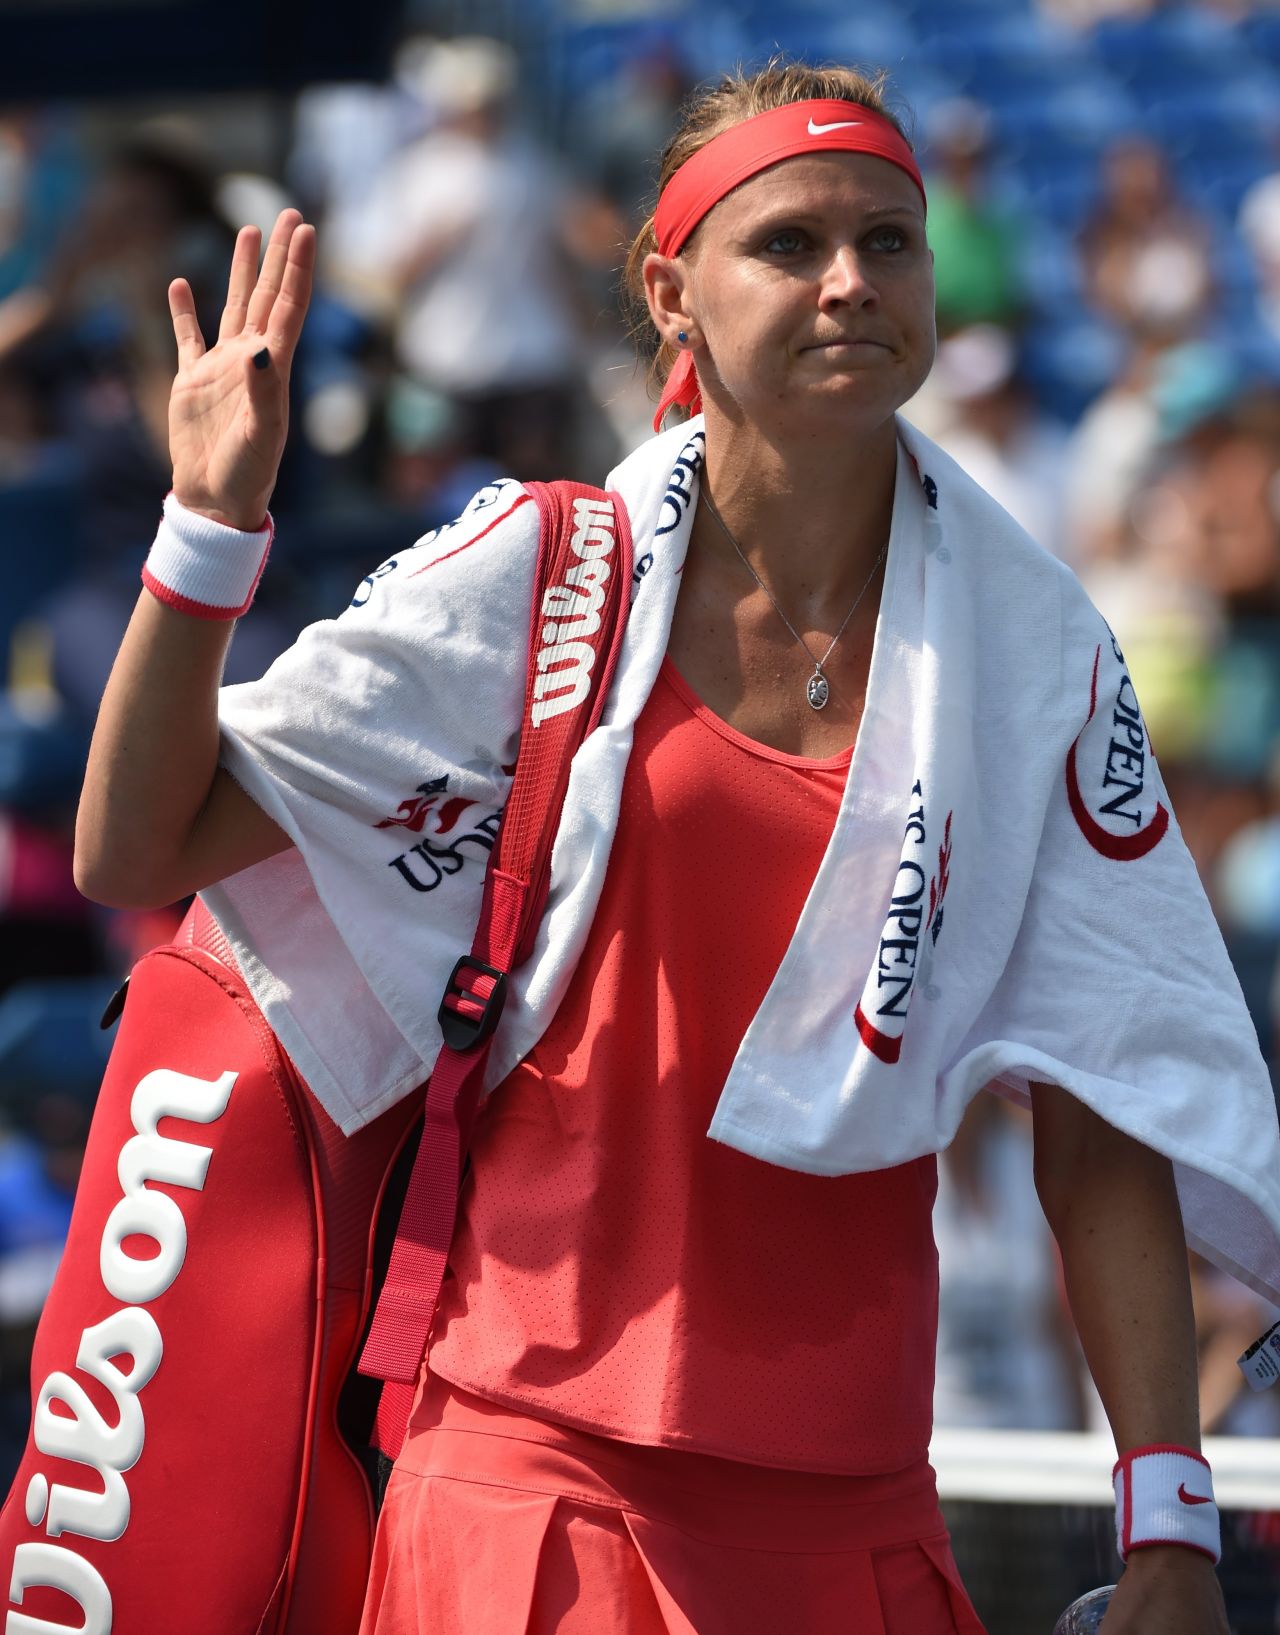 But French Open finalist Lucie Safarova made a quick exit, falling to the dangerous Lesia Tsurenko in two sets. 